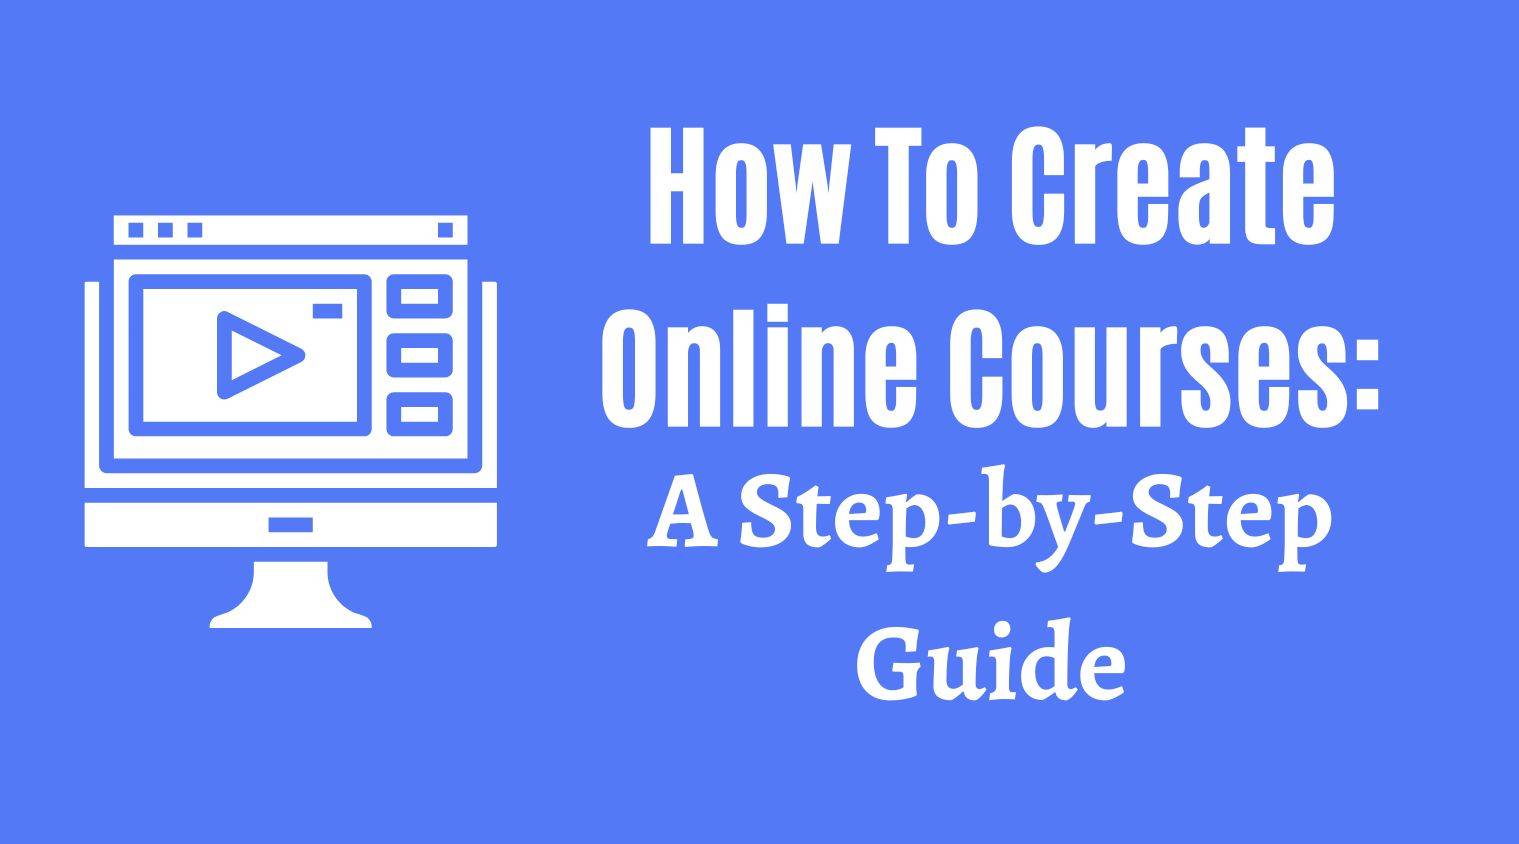 Online course creation using technical skills and online learning